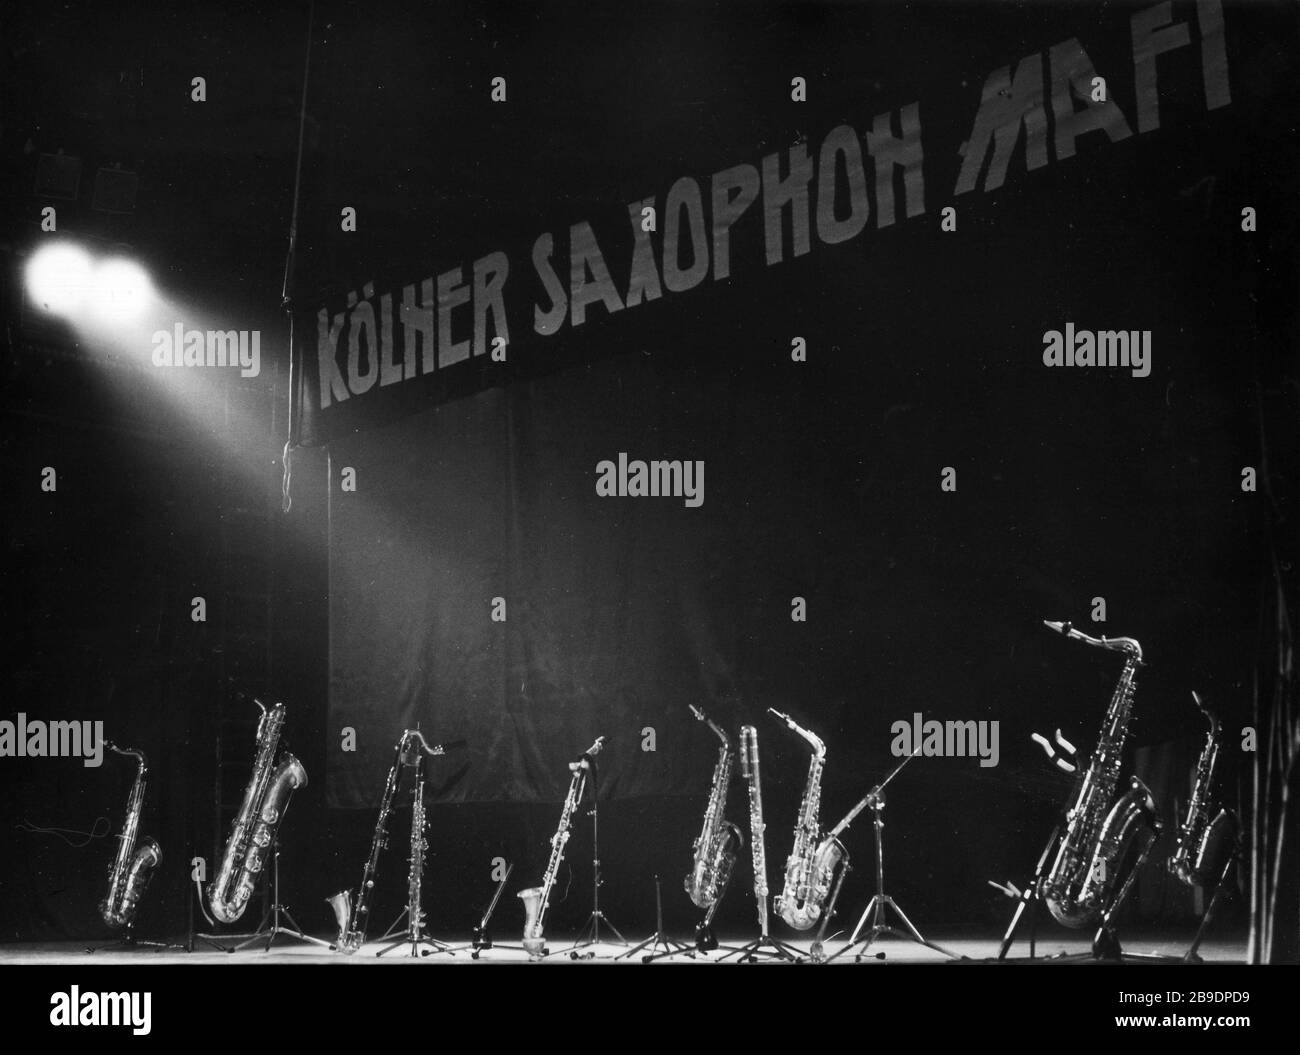 The saxophones of the jazz band 'Kölner Saxophon Mafia' are available for the musicians in their stands on the stage of the youth clubhouse in Halle an der Saale in March 1990. In the background on the curtain the name of the band. The instruments are illuminated by a spotlight. [automated translation] Stock Photo